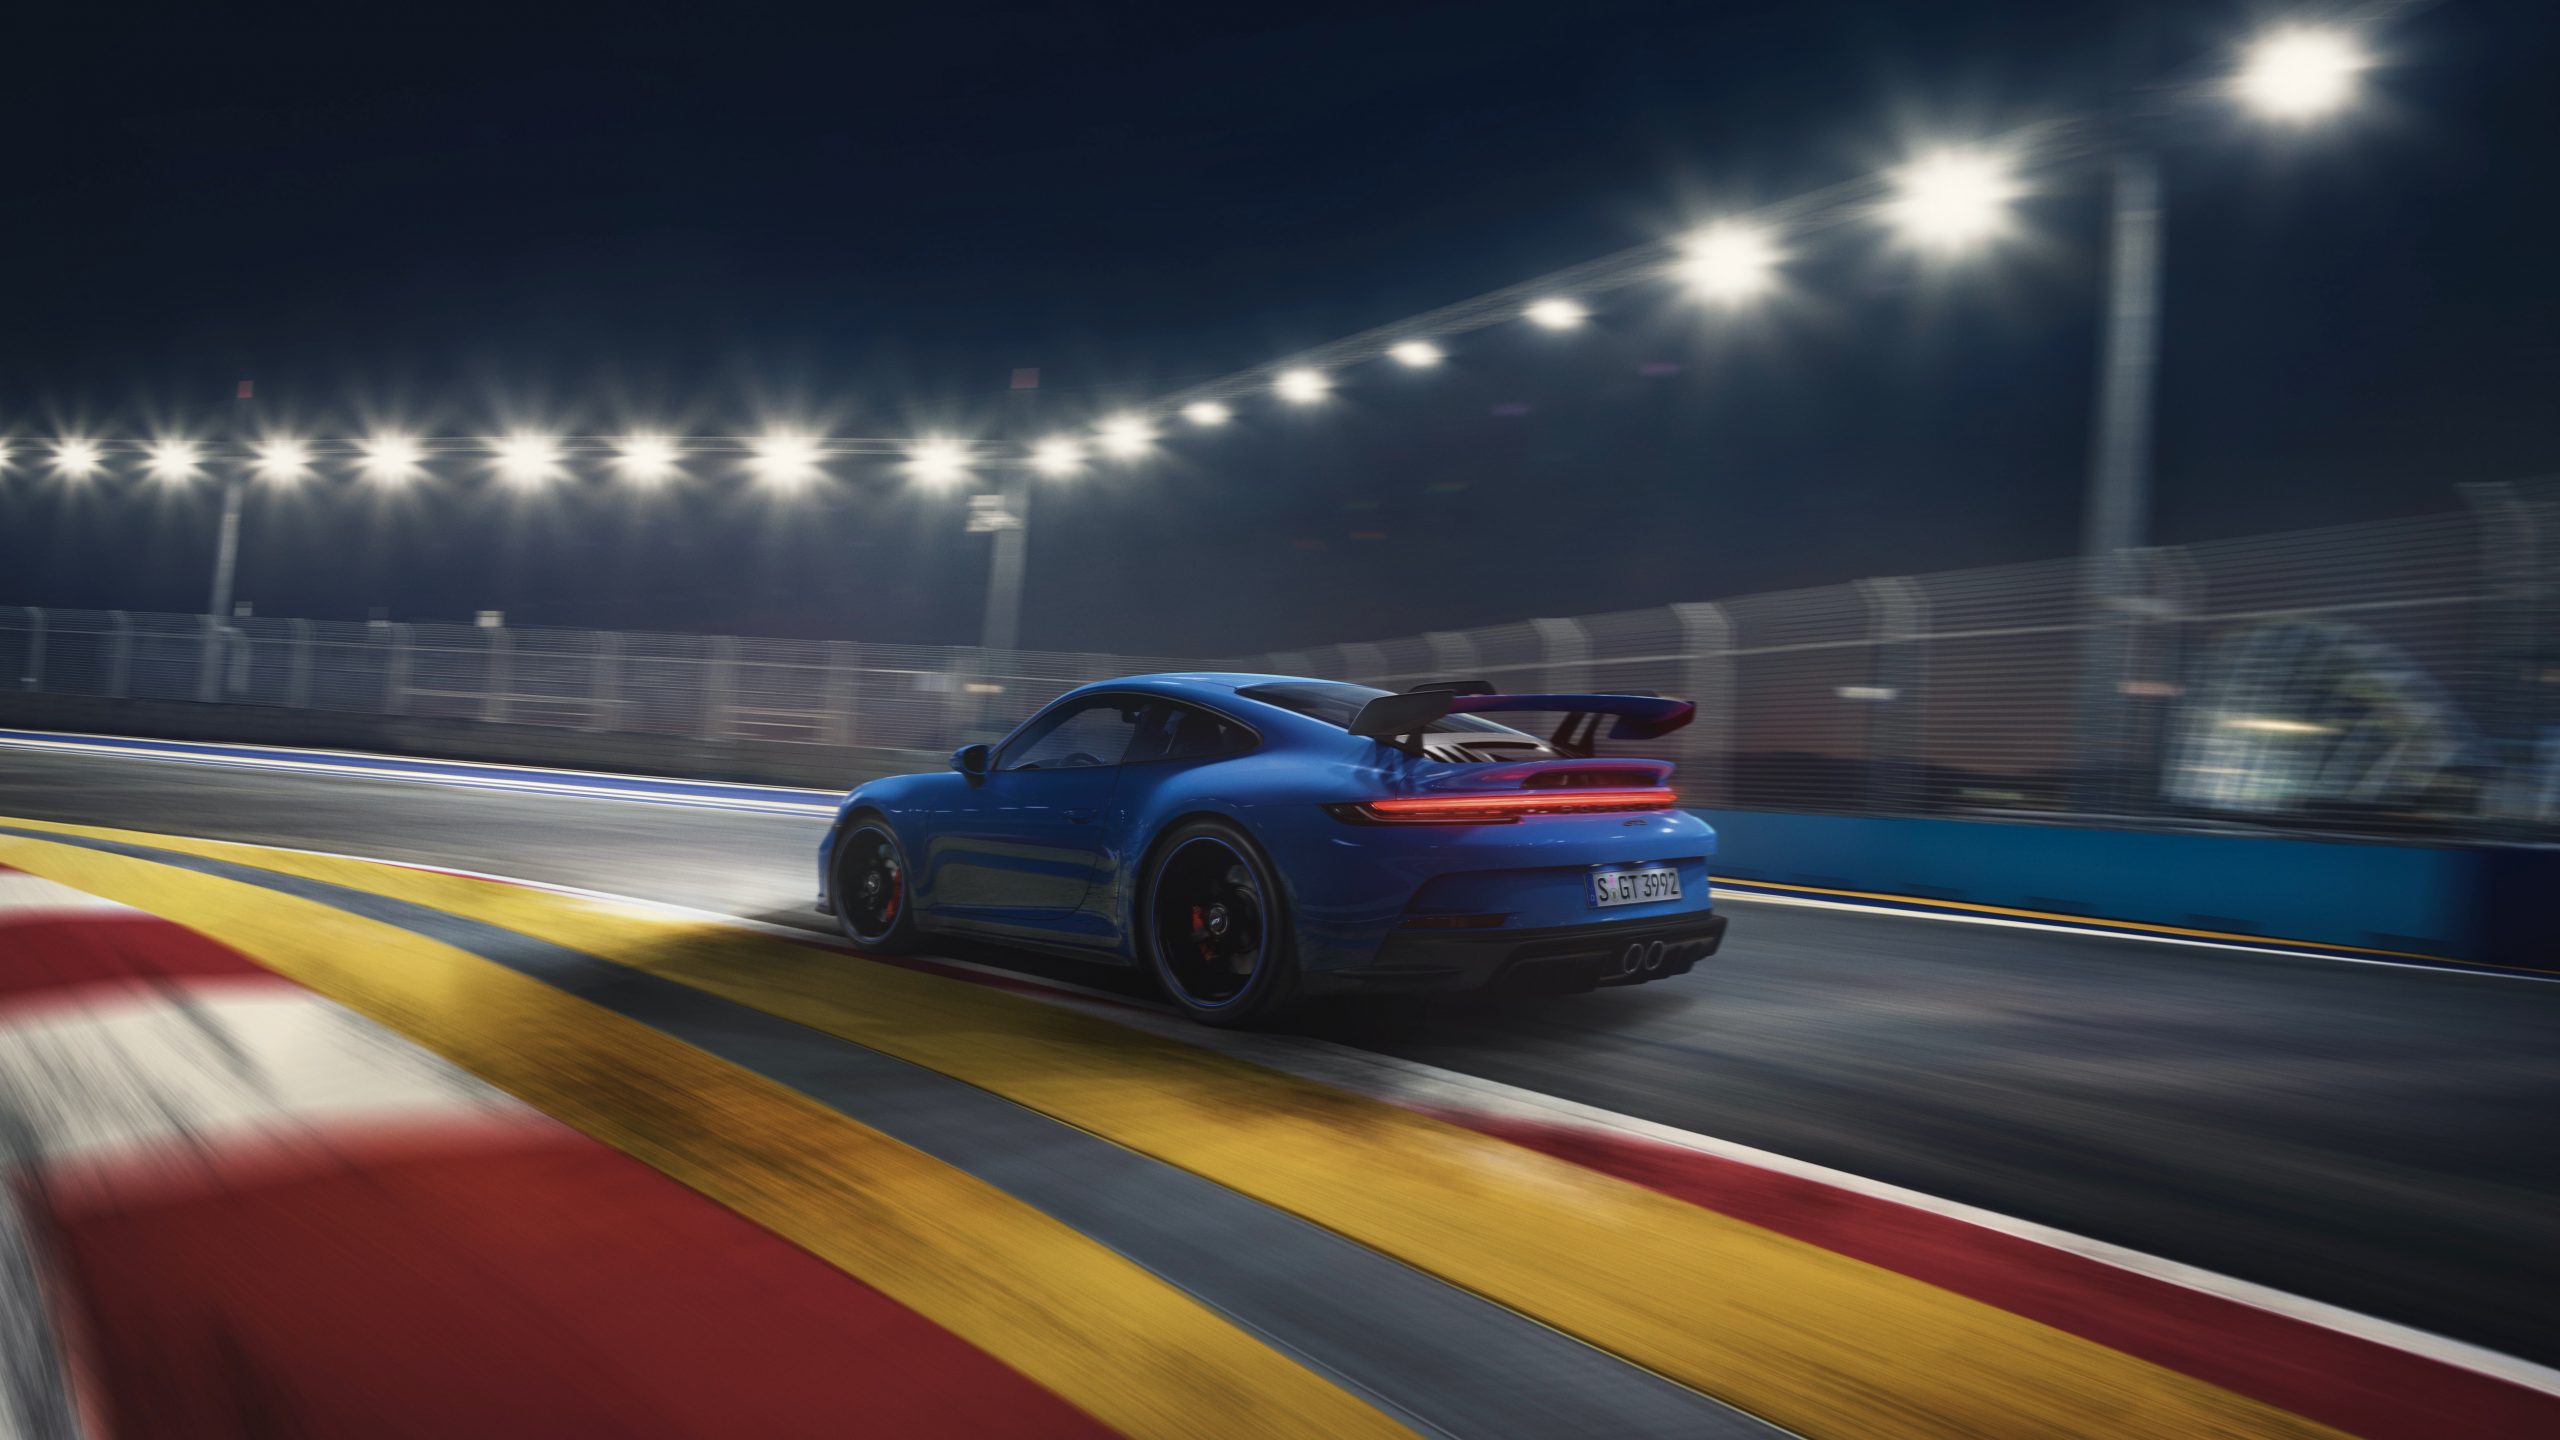 A blue 2022 Porsche 911 GT3 driving on a lit track at night